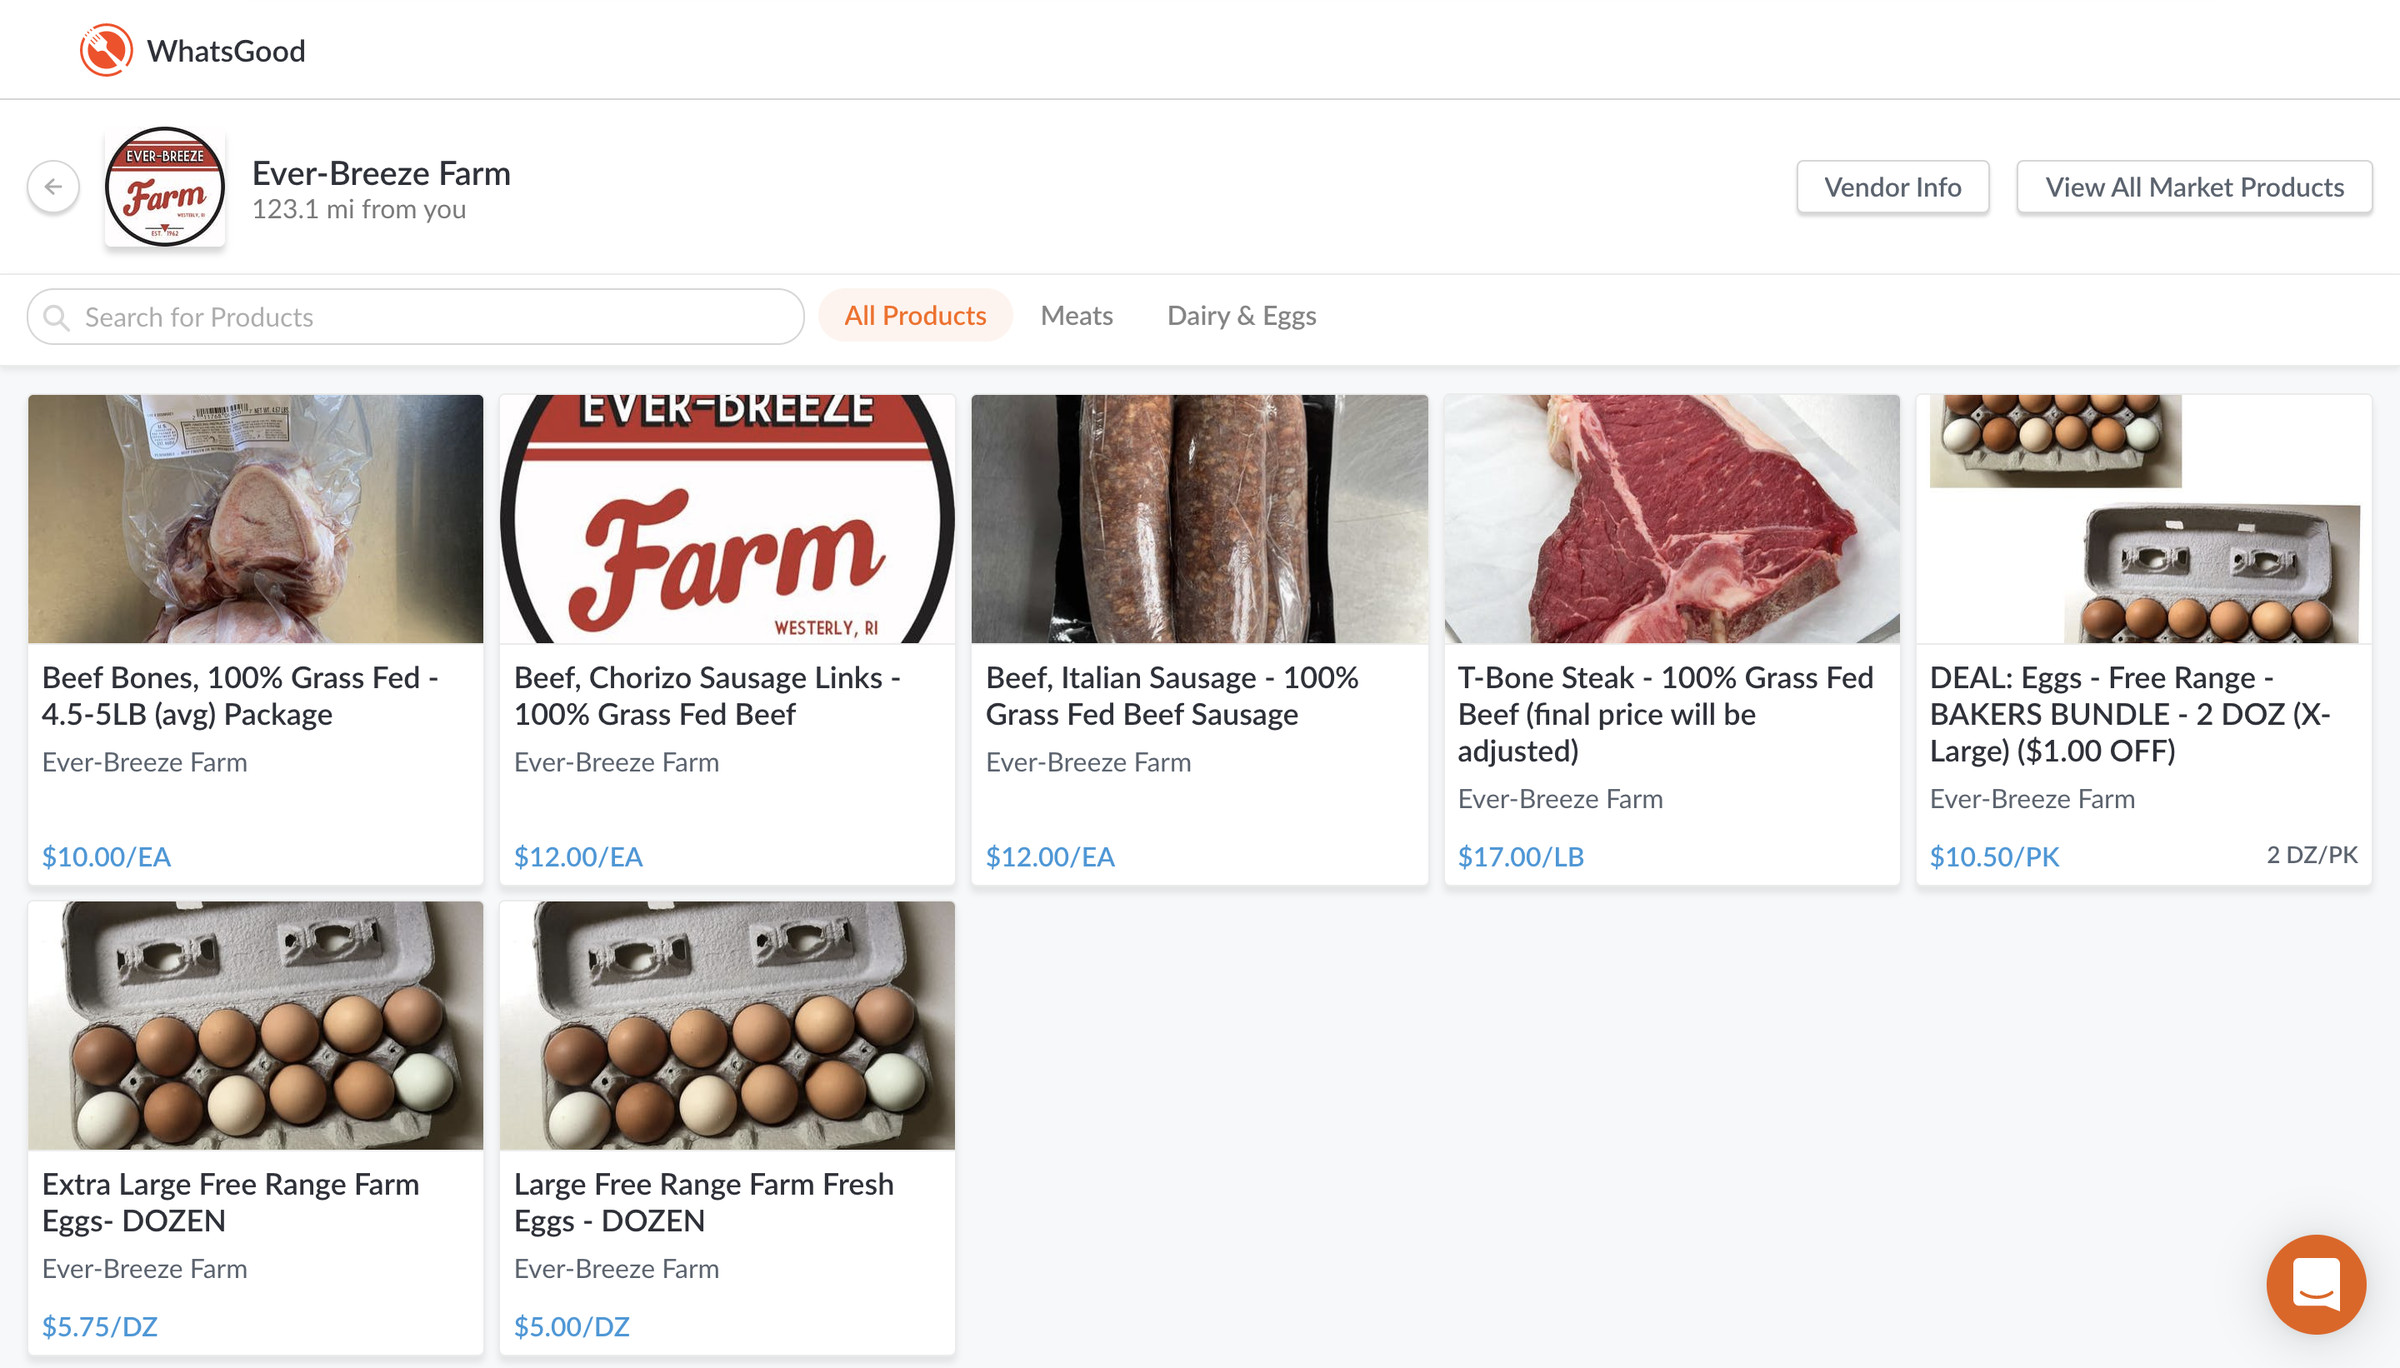 An online store with photos of meat and eggs. You can buy beef bones, chorizo sausage links, Italian sausage, T-bone steak, and different packages of eggs.